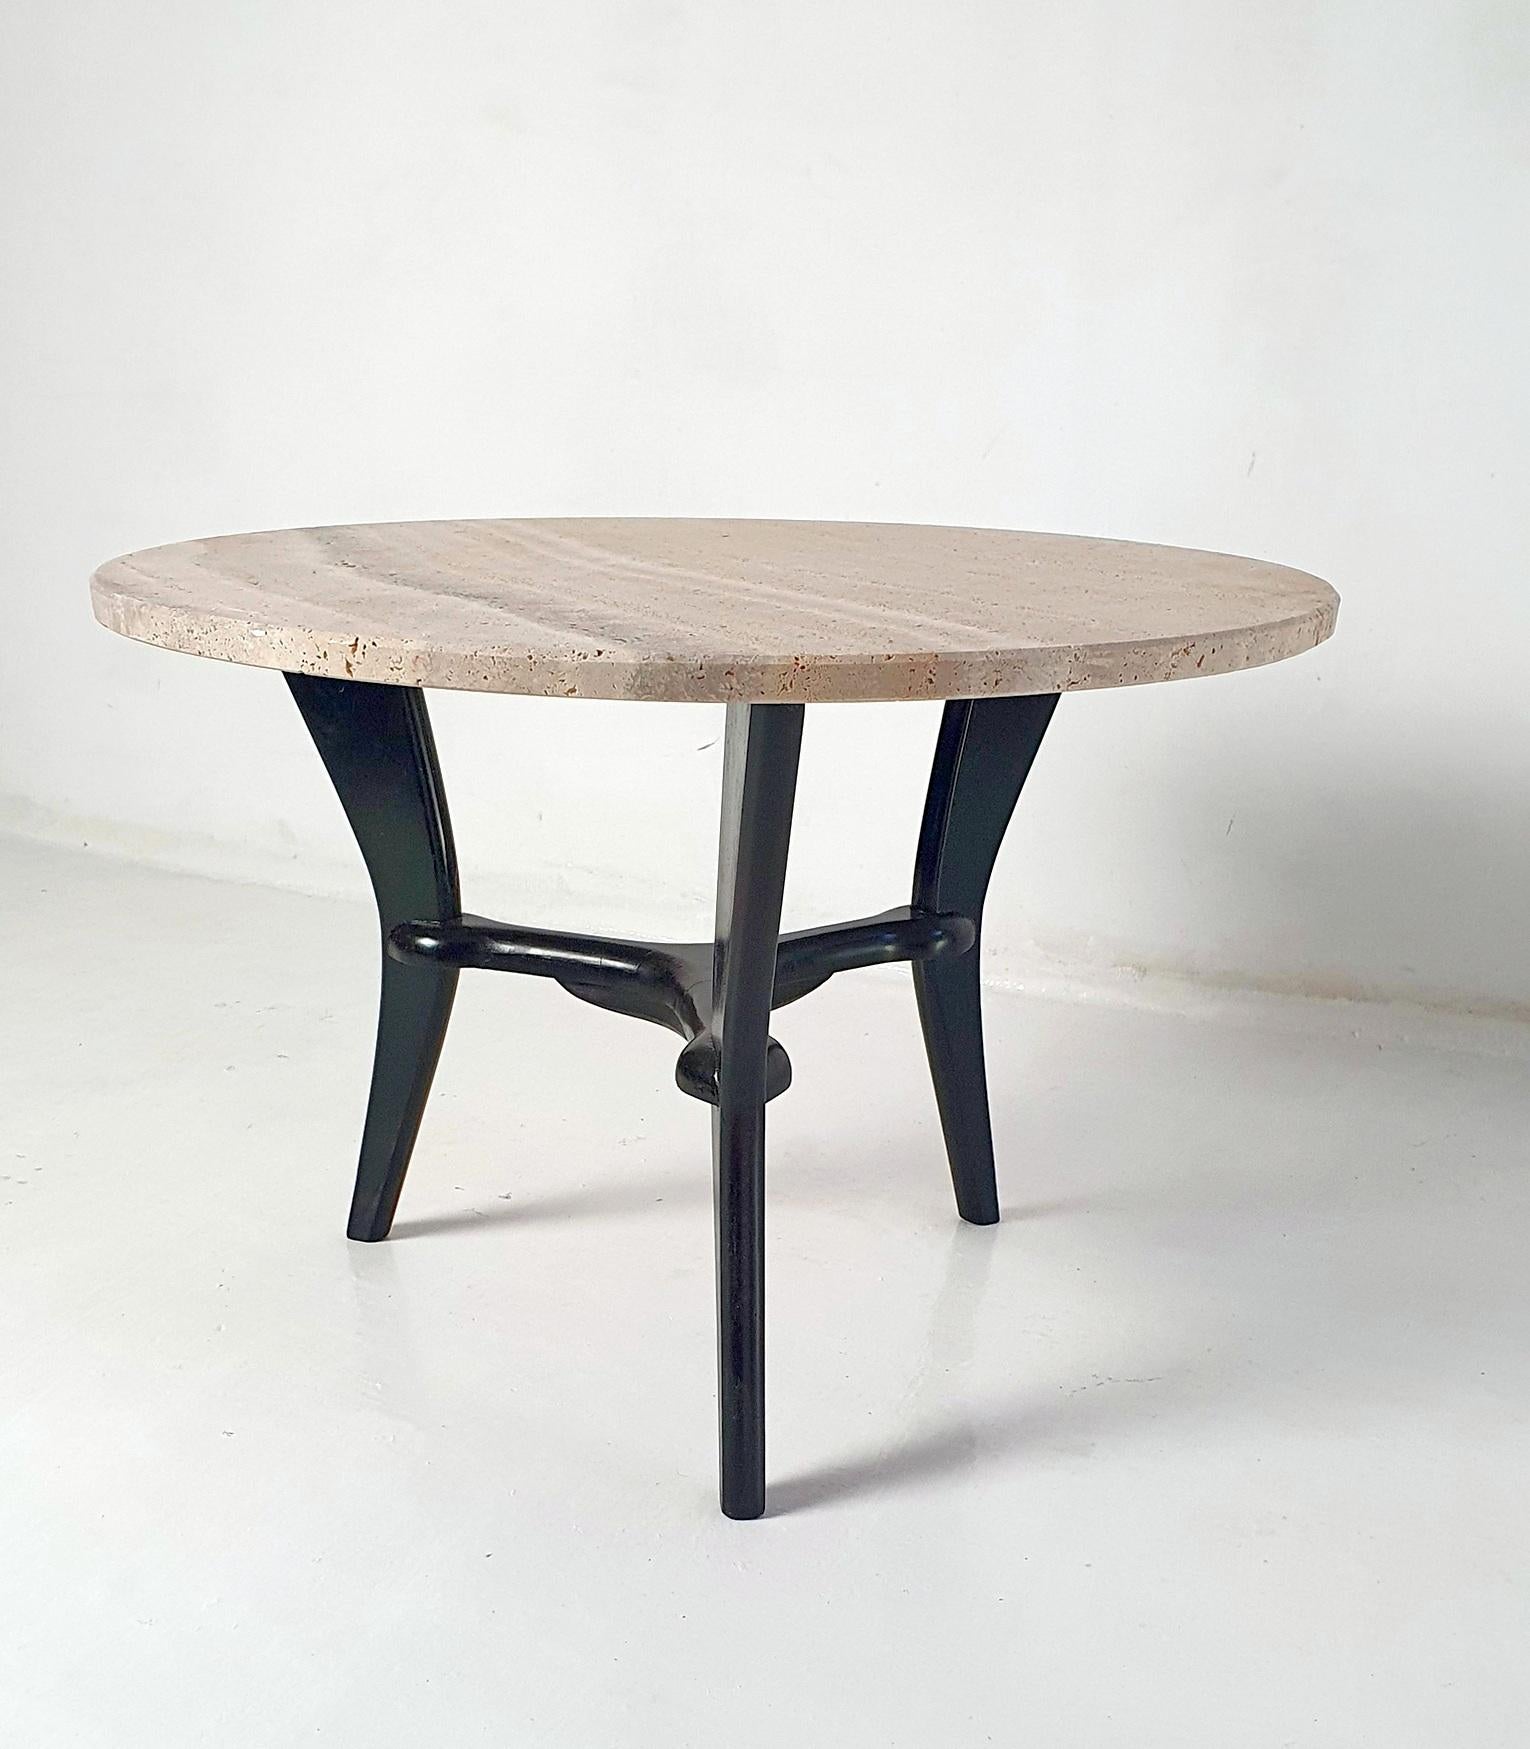 20th Century Mid-Century Round Coffee Table in Travertine, Italy, 1950's For Sale